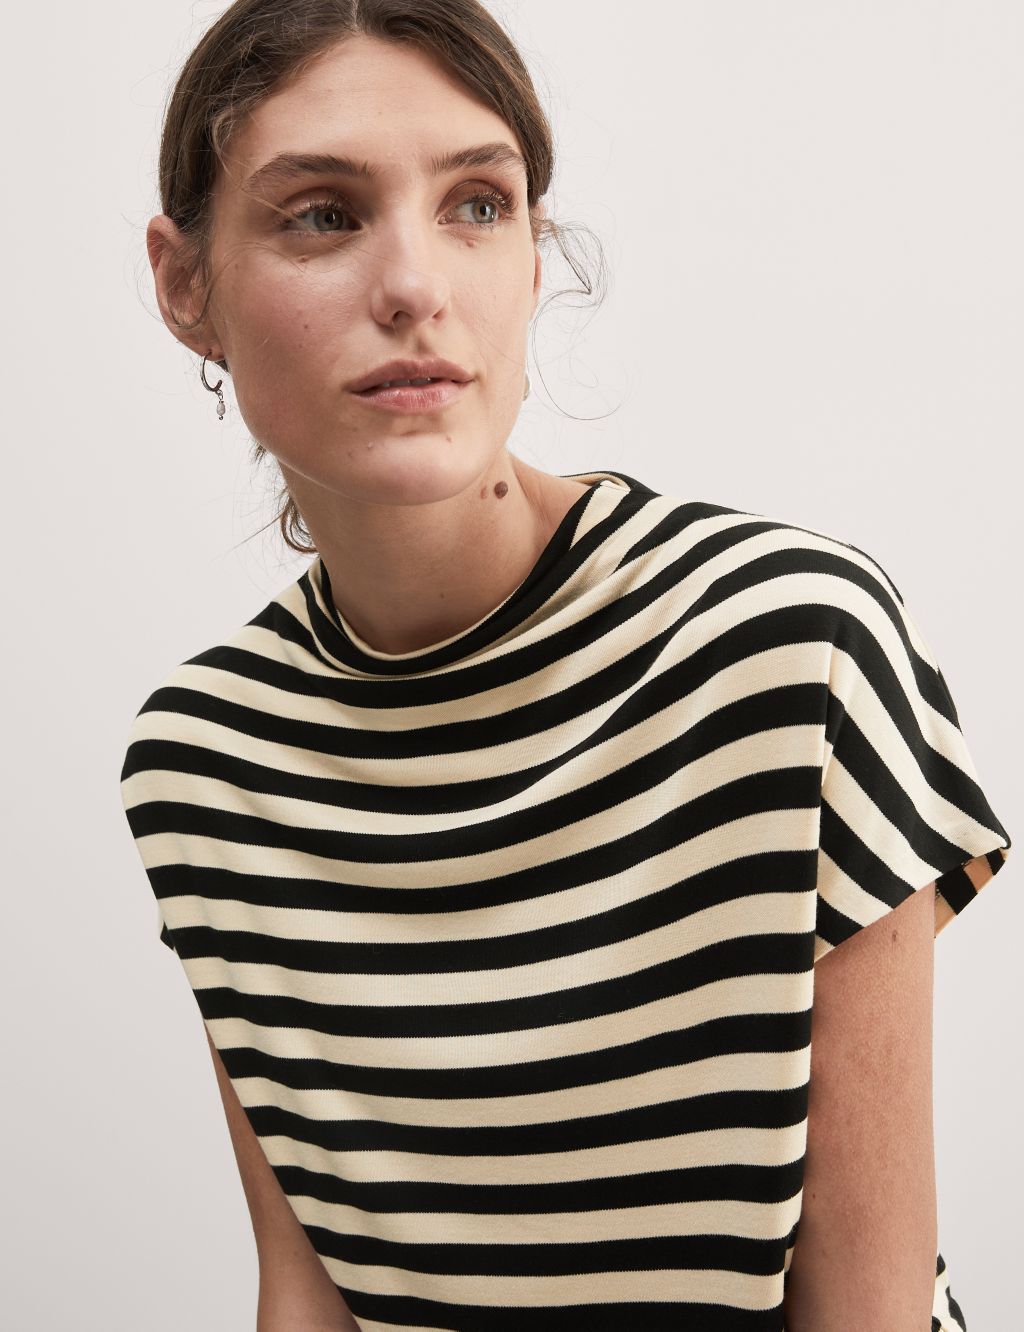 Jersey Striped Top